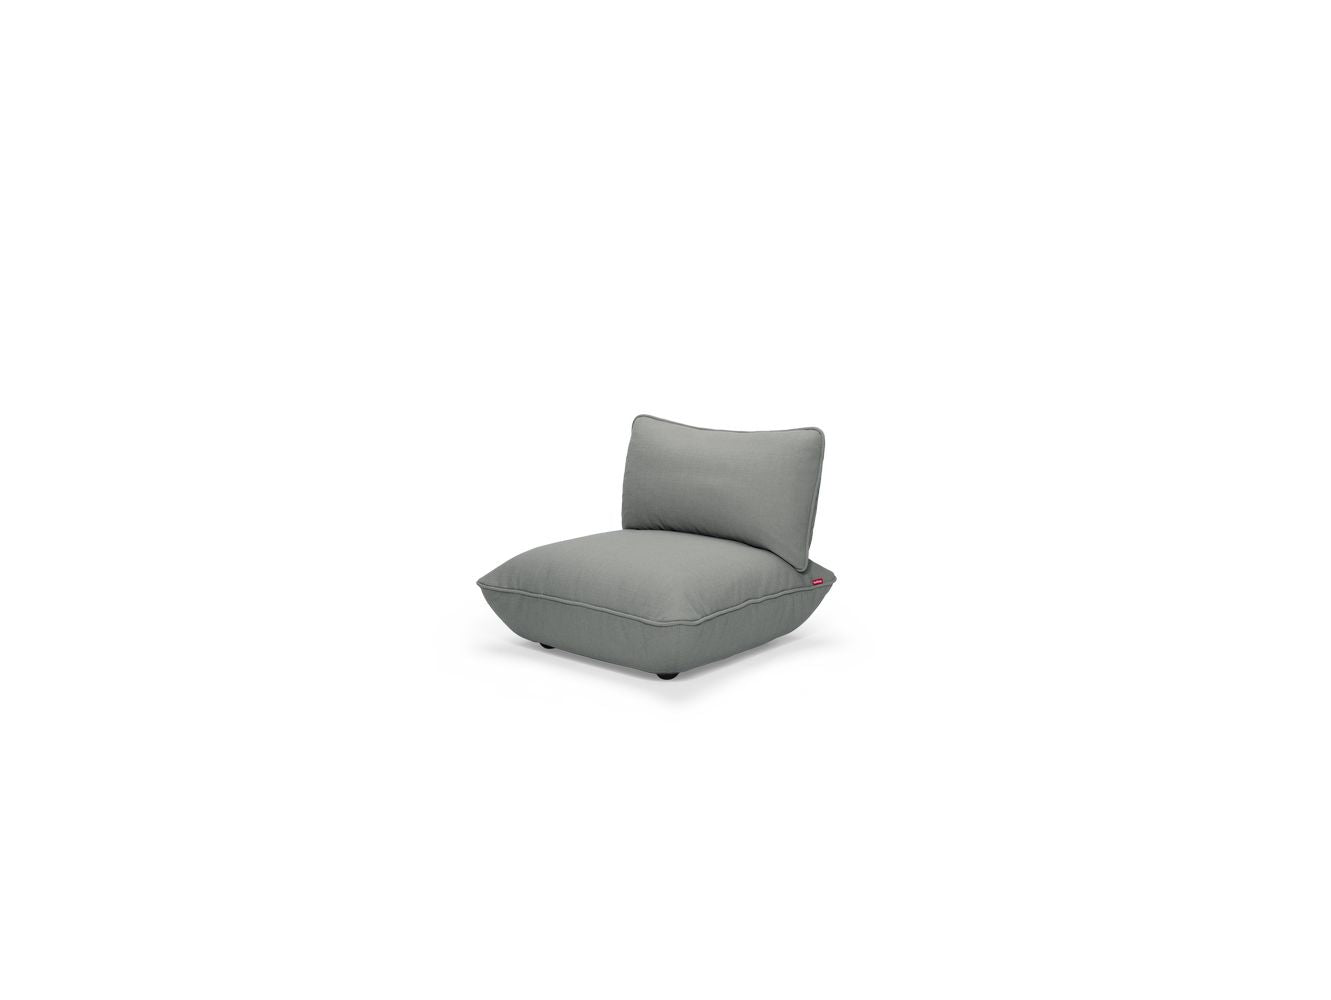 Fatboy Sumo Seat Item, Mouse Grey